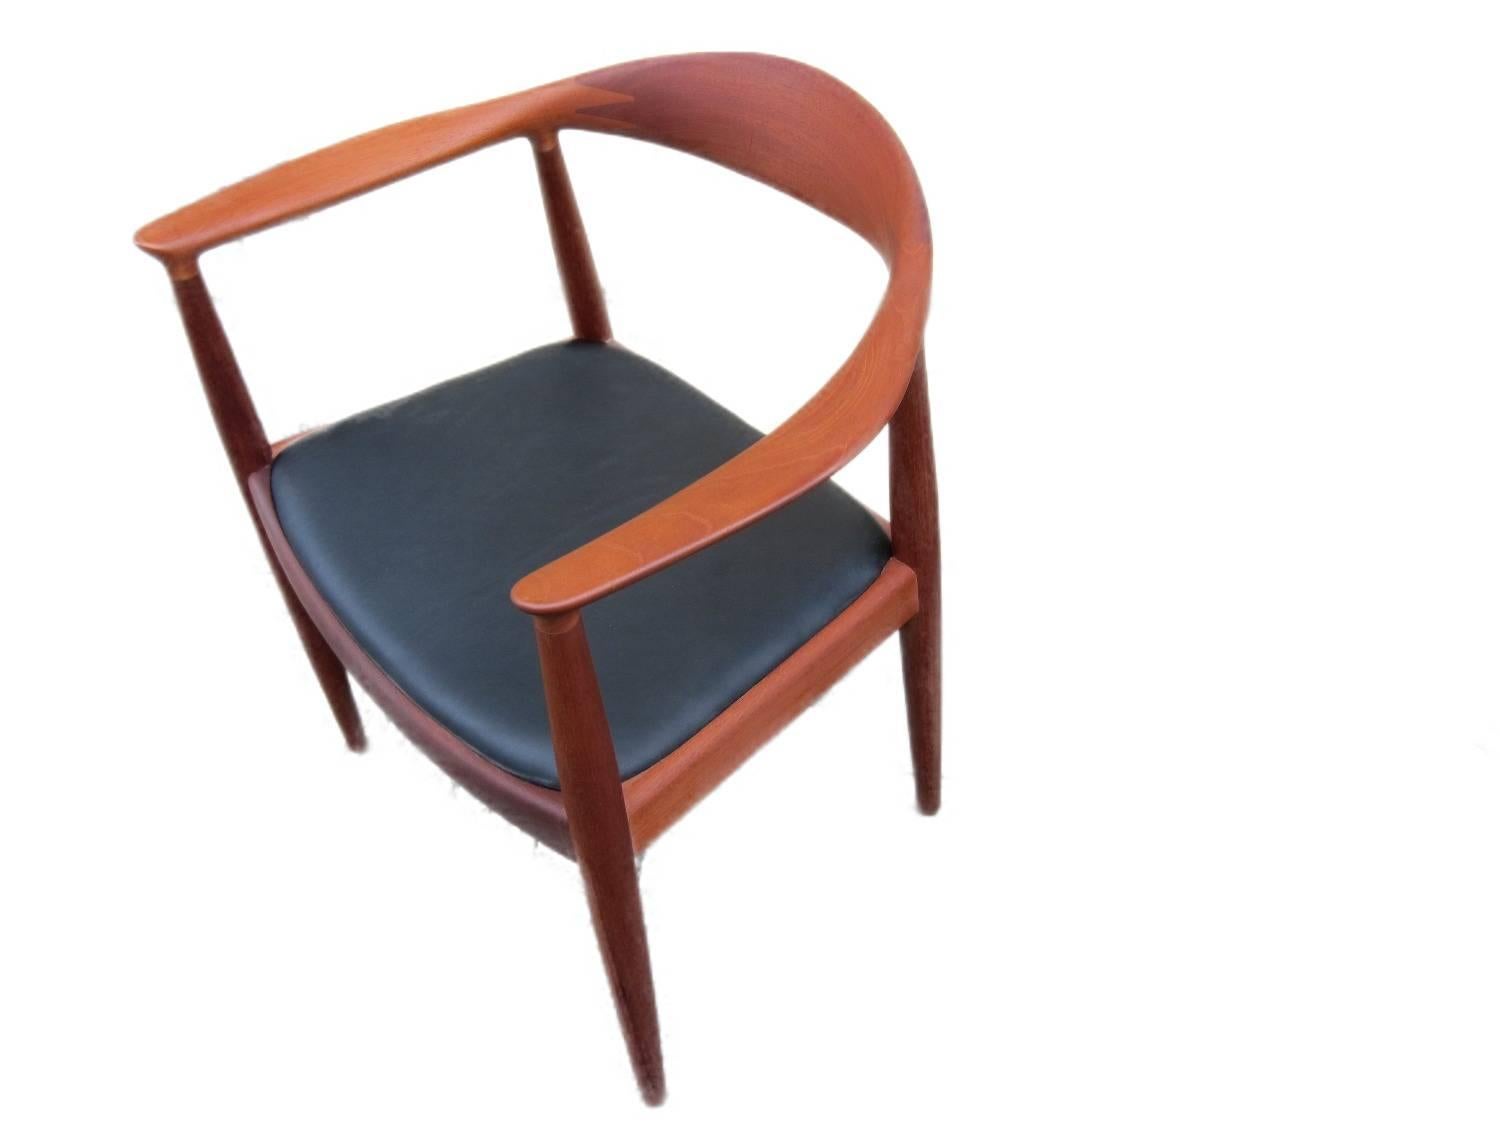 This round chair, Model JH-503 ("The Chair") comes with frames in mahogany and original black leather seats. It was manufactured at Fredericia Furniture.

This specific model of the chair is not in production anymore.